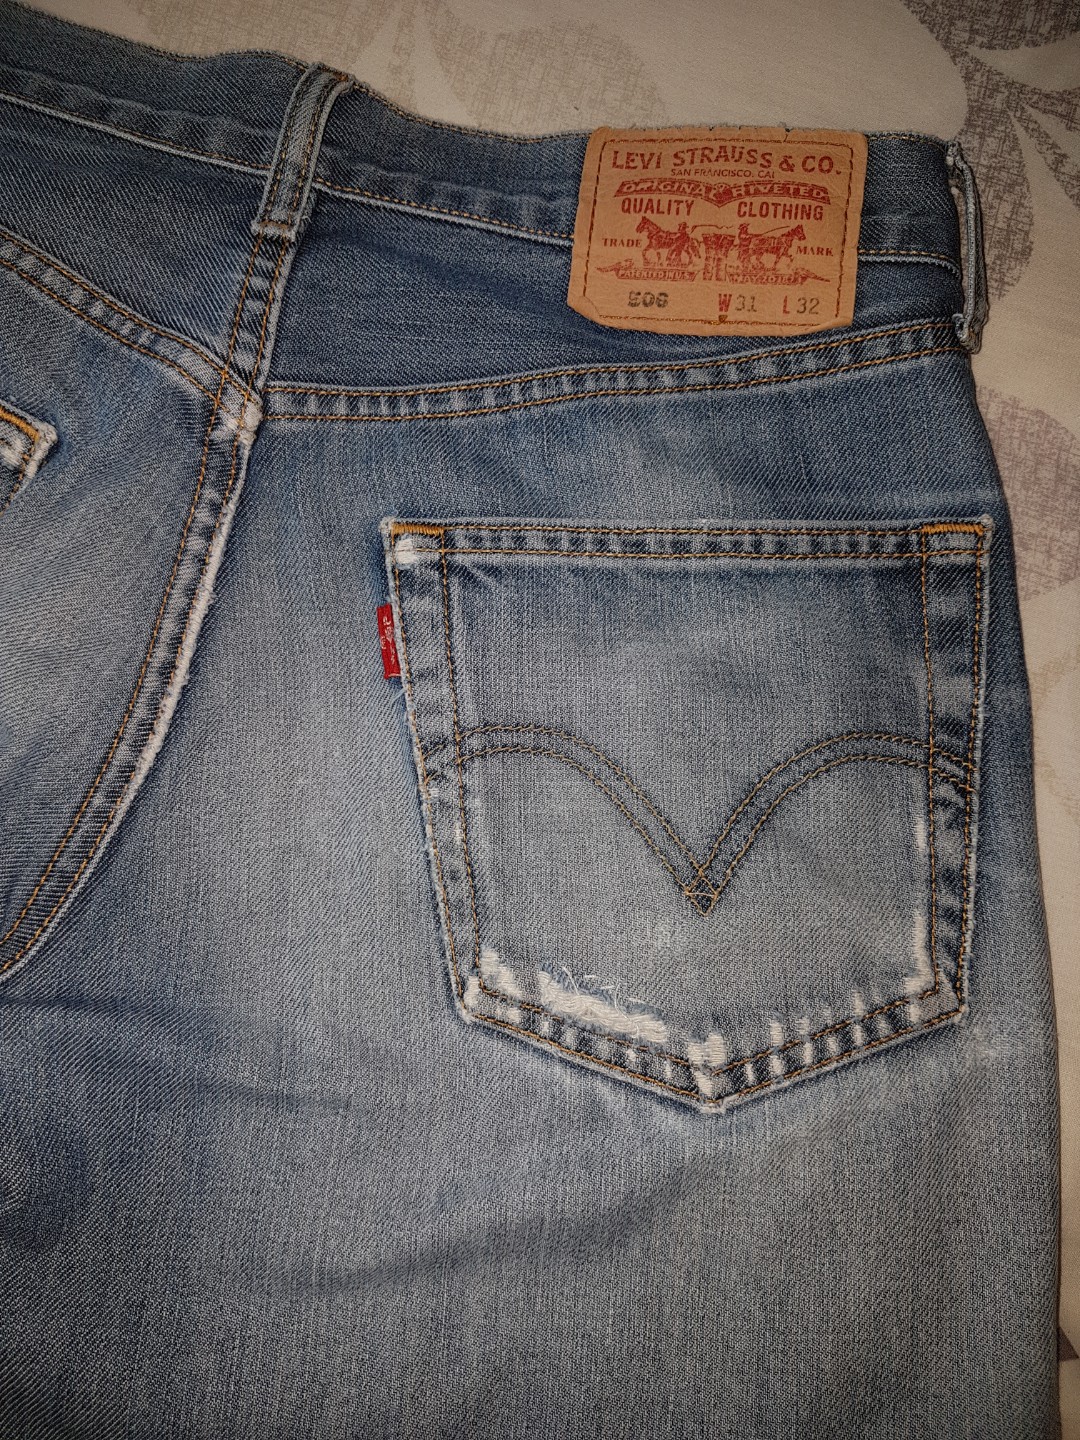 Levis 506 Ripped & patched, Men's Fashion, Bottoms, Jeans on Carousell